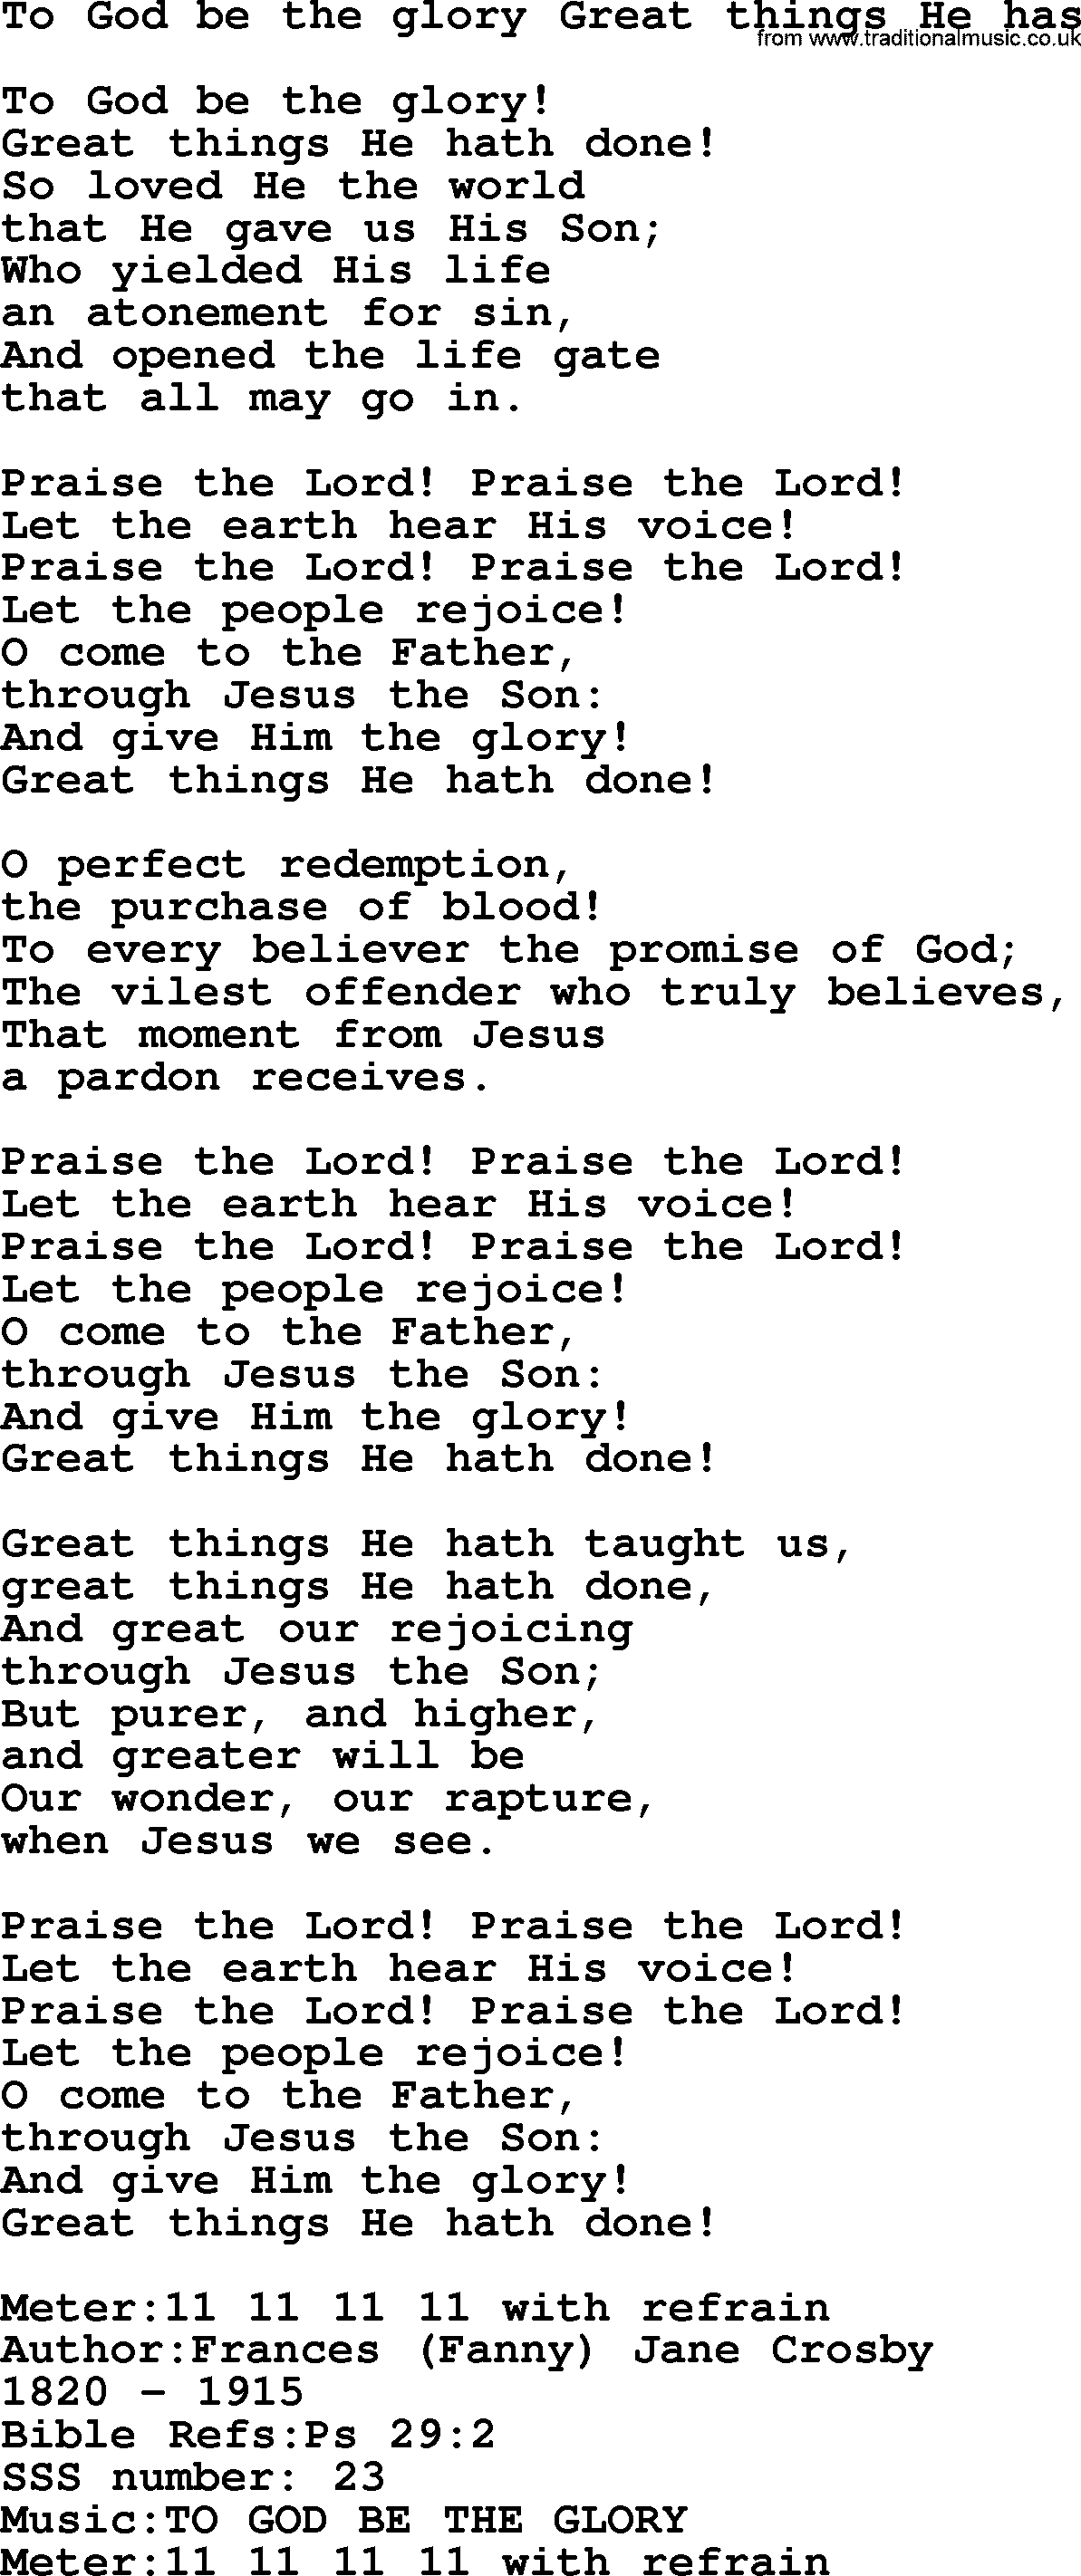 Sacred Songs and Solos complete, 1200 Hymns, title: To God Be The Glory Great Things He Has, lyrics and PDF